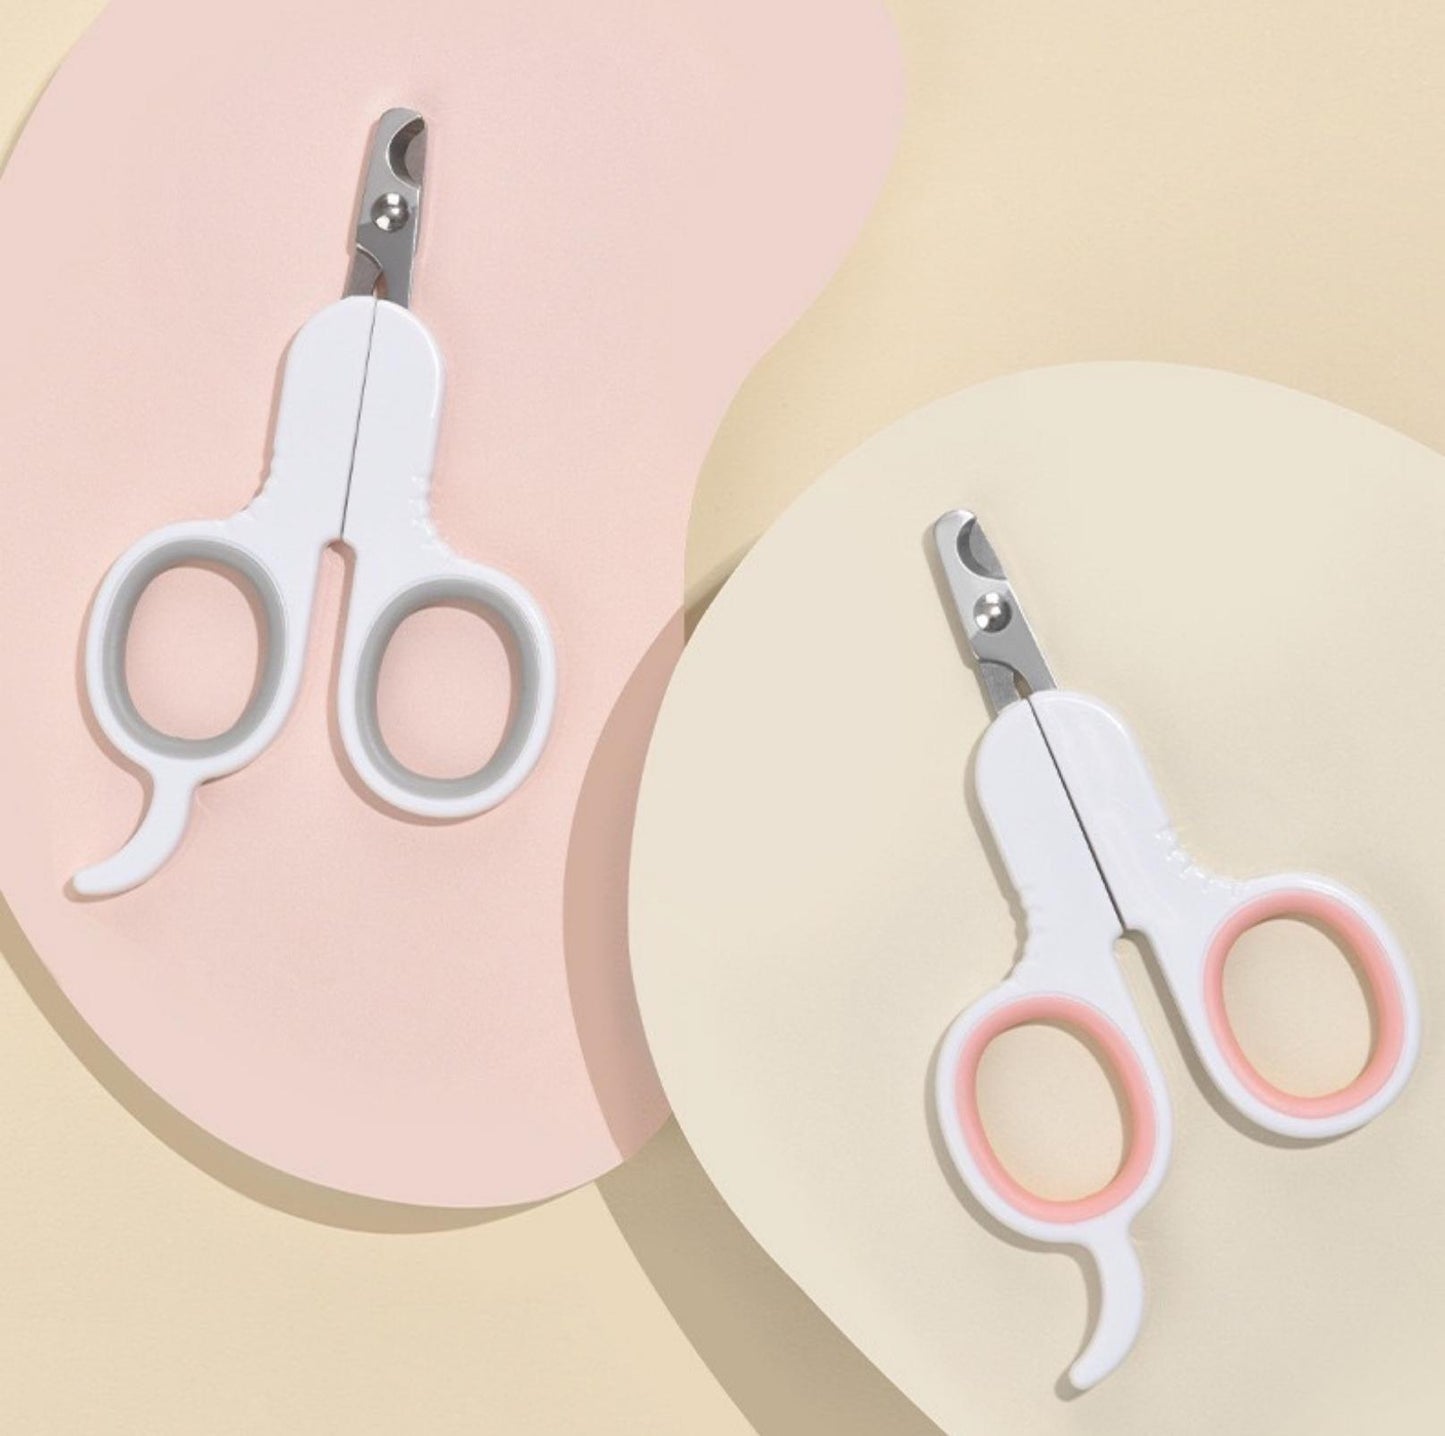 Pakeway "Q" shape cat nail clippers - {{product.type}} - PawPawUp